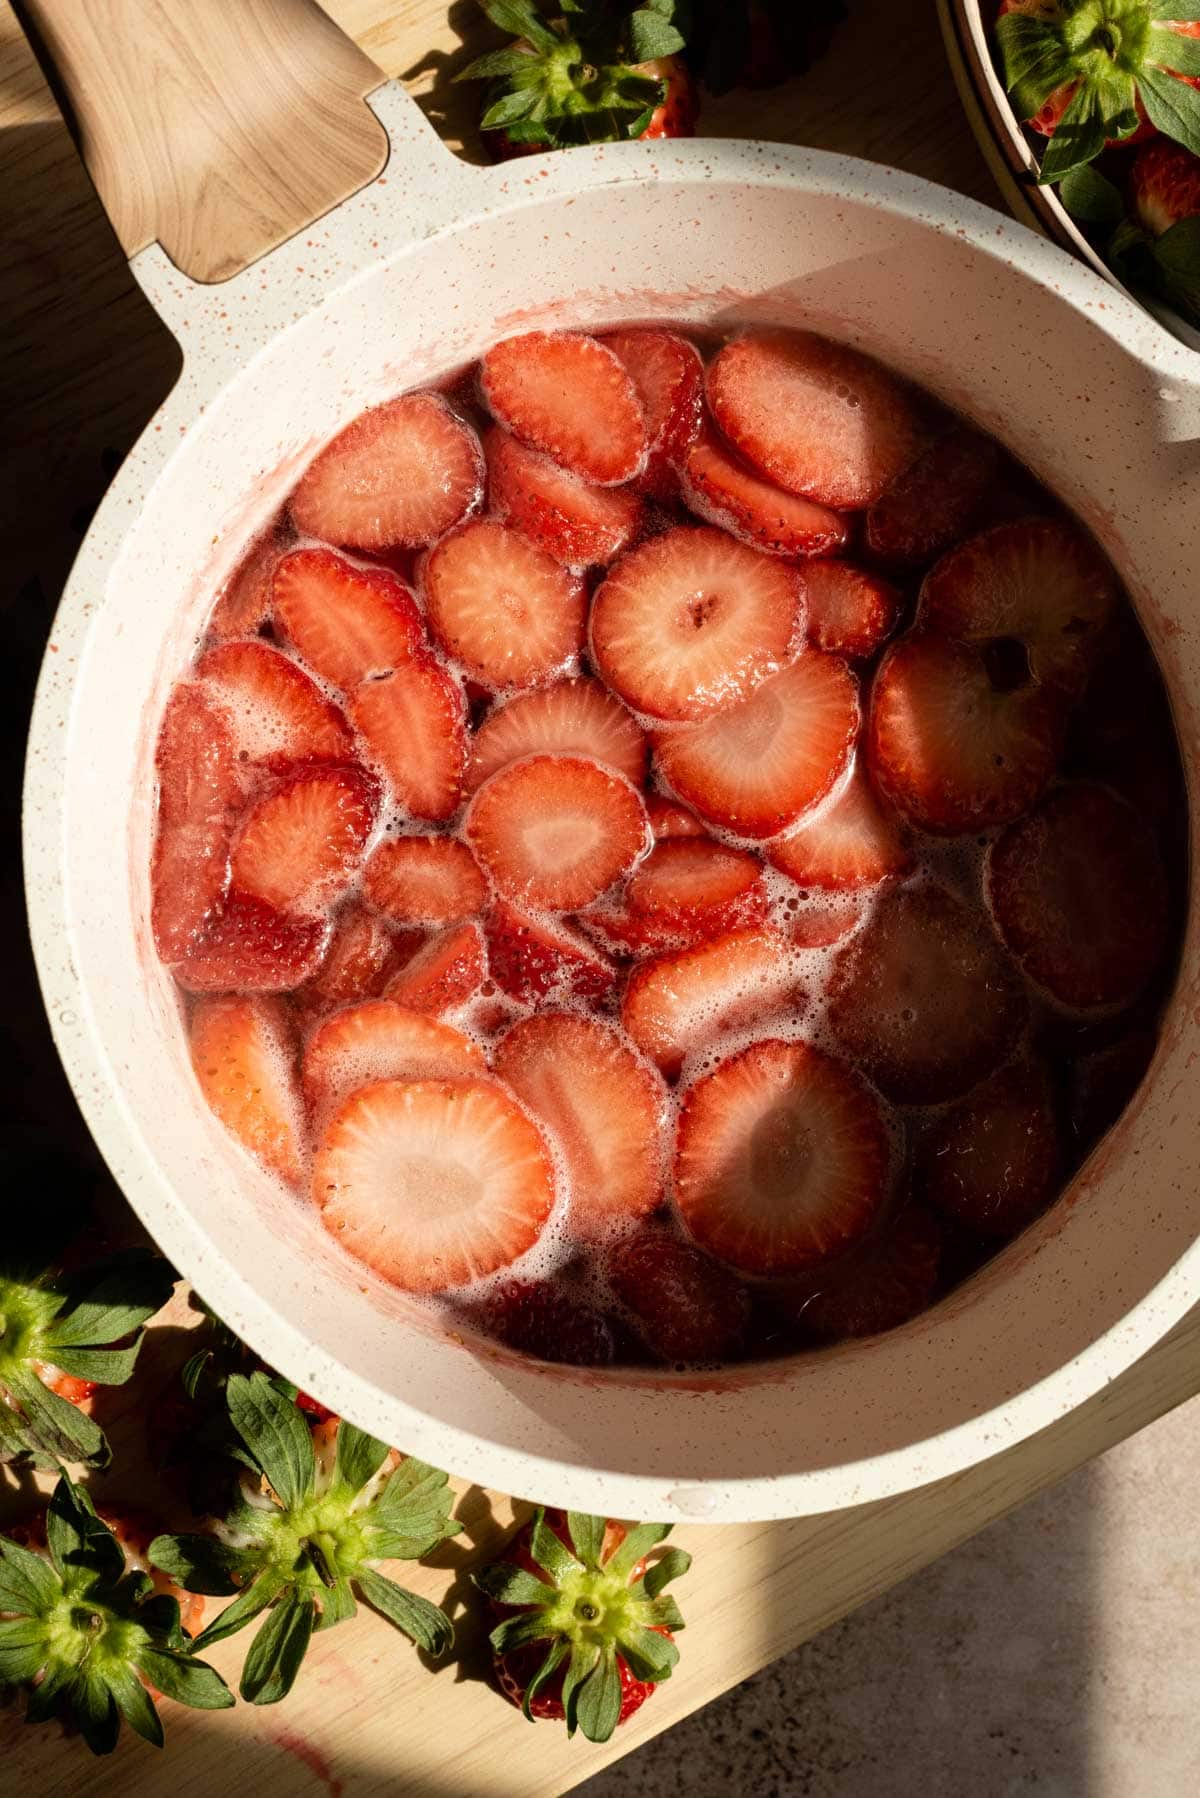 Cook the strawberries until they are pale.